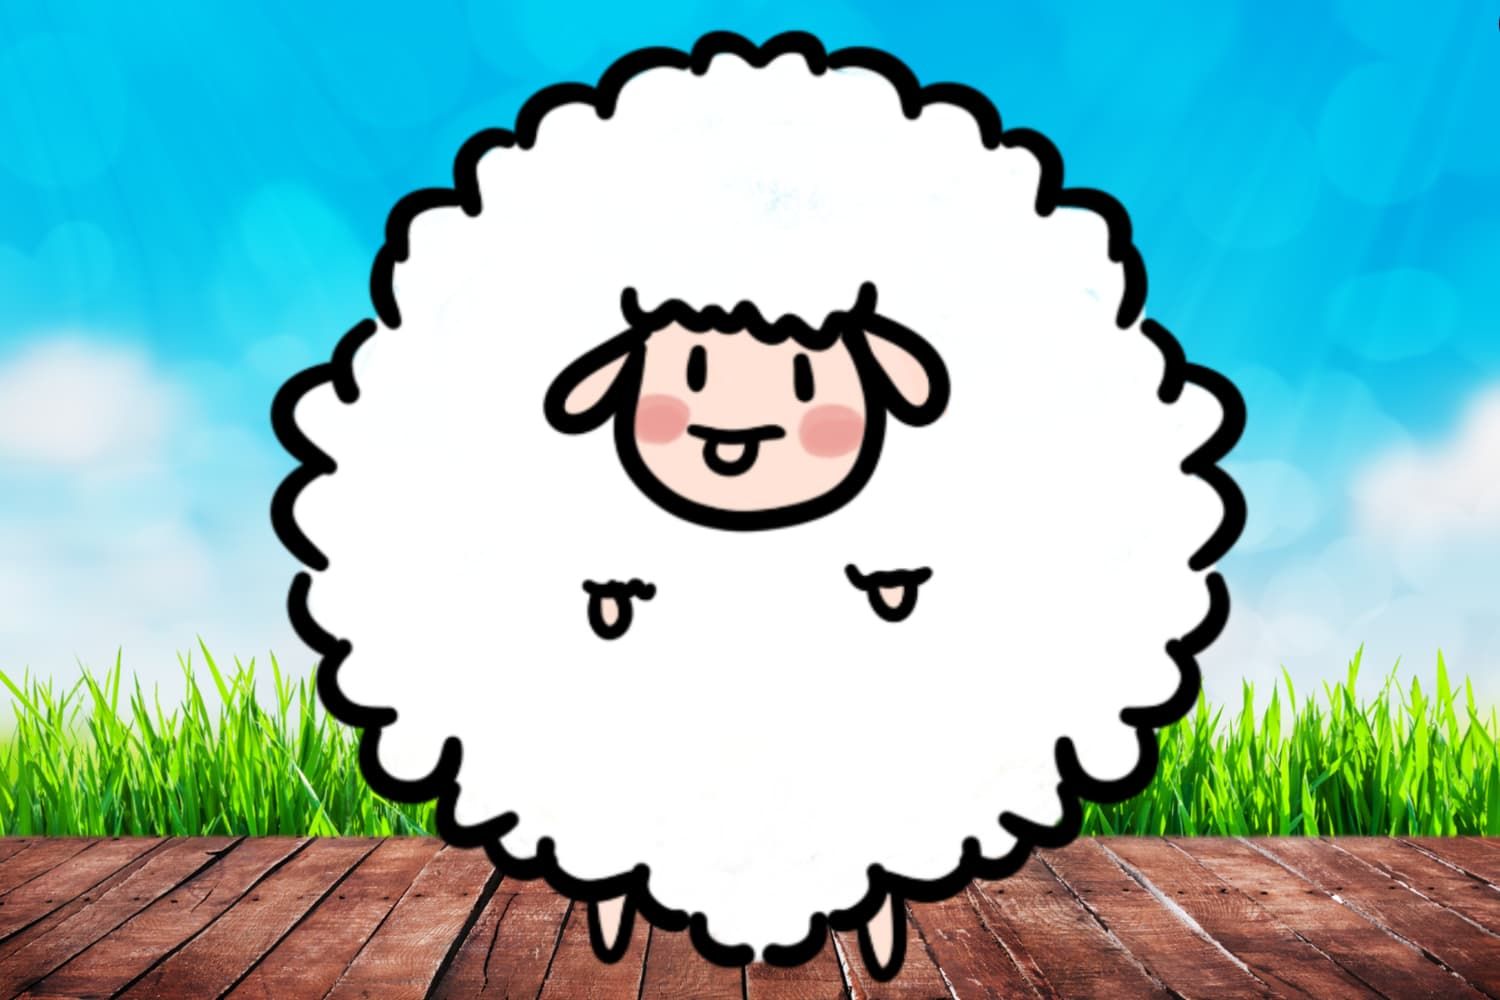 Walk-in%20activity%20-%20OT%20Psalm%2023%20-%20Make%20a%20giant%20sheep-a8365ba0 Promises